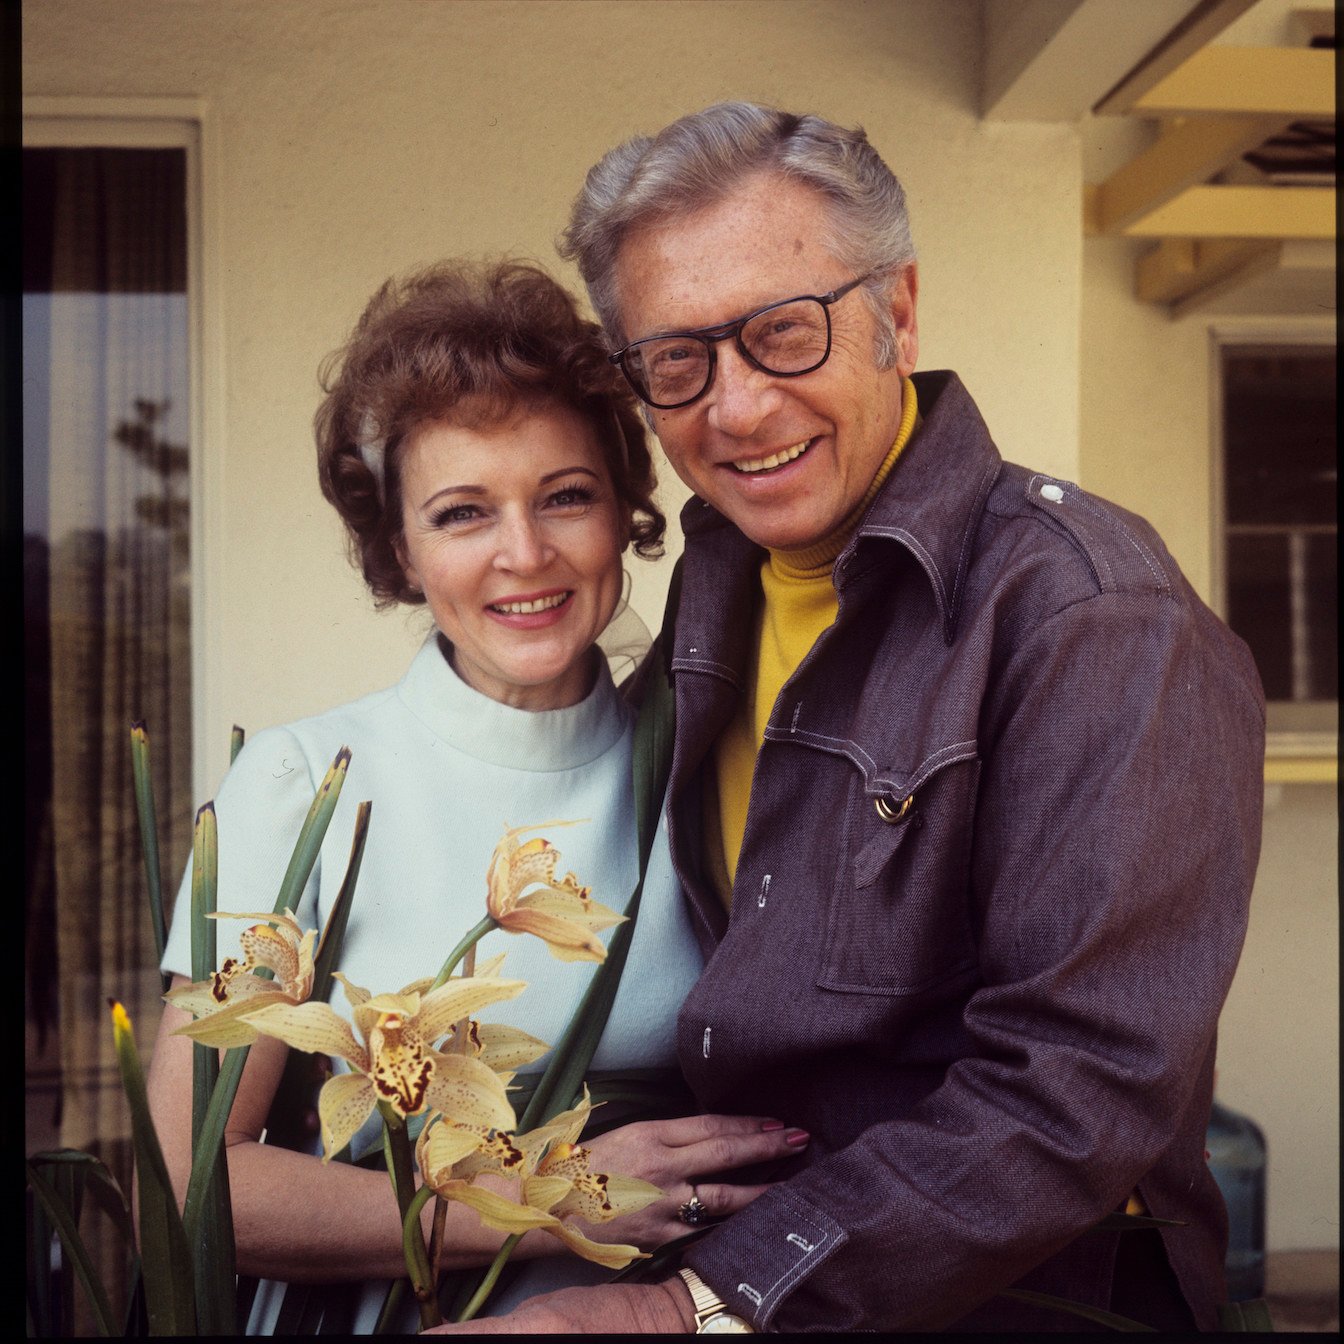 Betty White and Allen Ludden smiling and embracing each other outside. Betty White's stepchildren were Allen Ludden's three kids